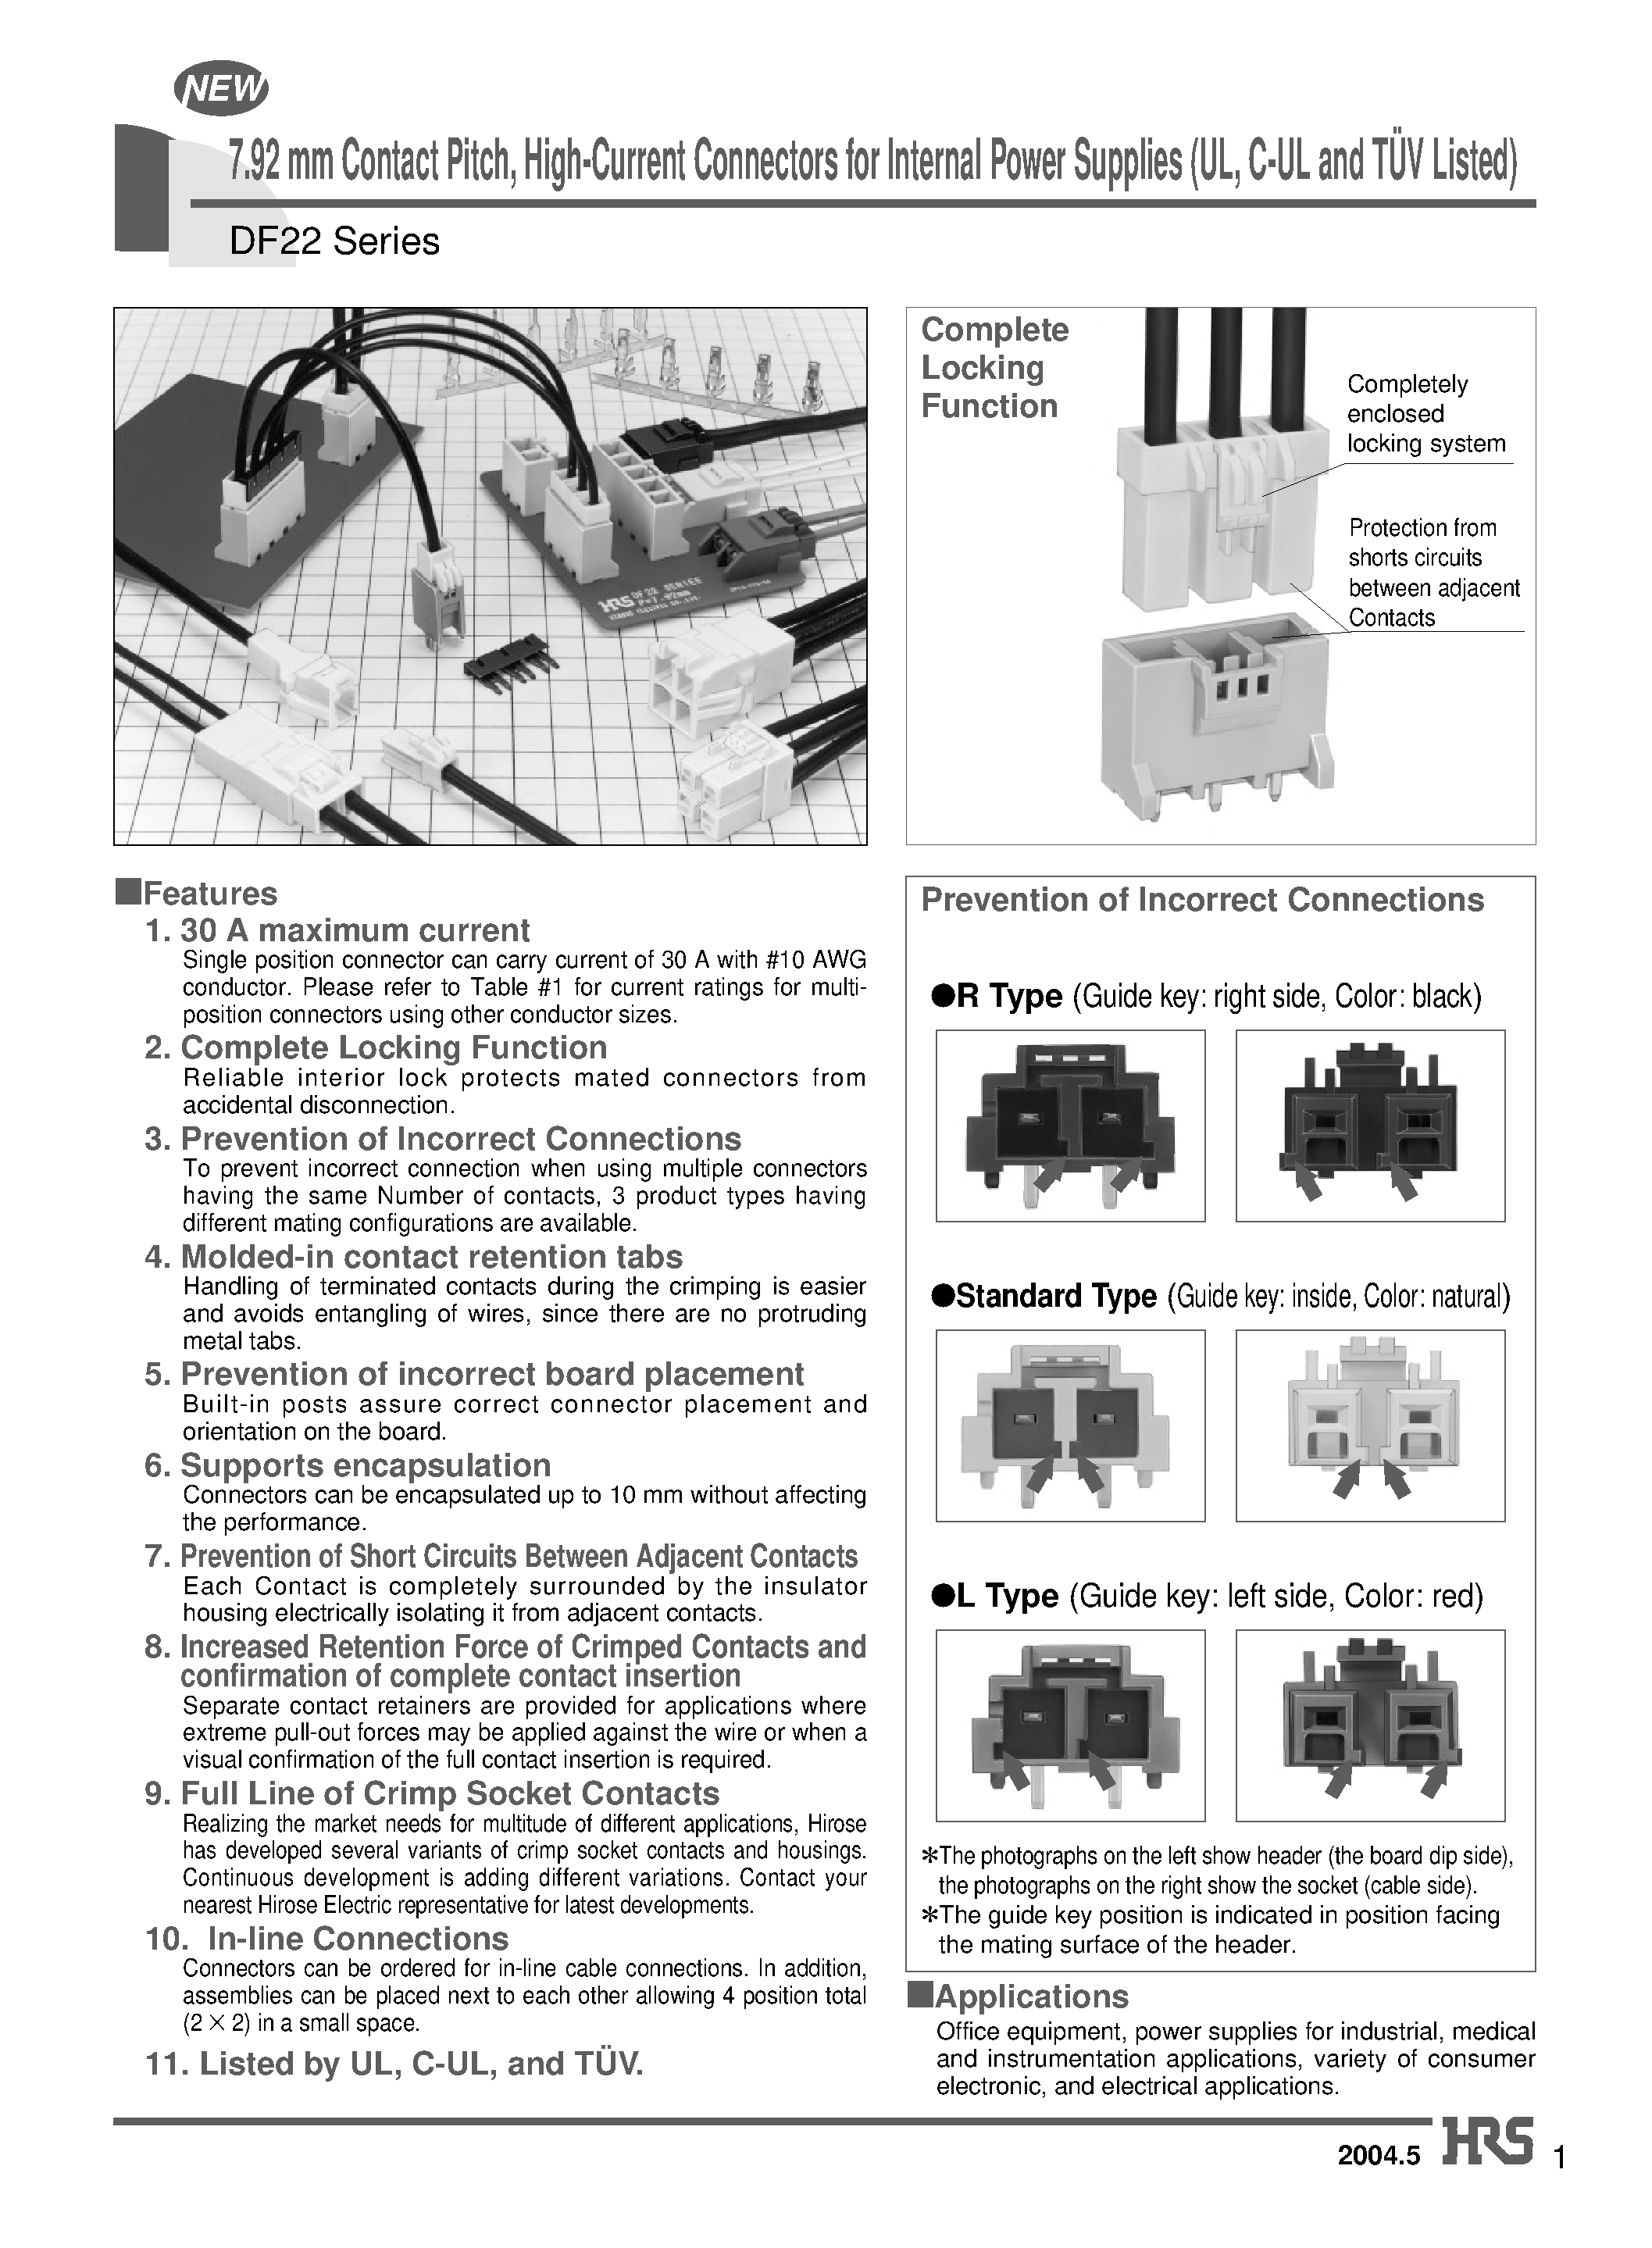 Datasheet DF22-3P-7.92DSA - 7.92 mm Contact Pitch/ High-Current Connectors for Internal Power Supplies (UL/ C-UL and TUV Listed) page 1